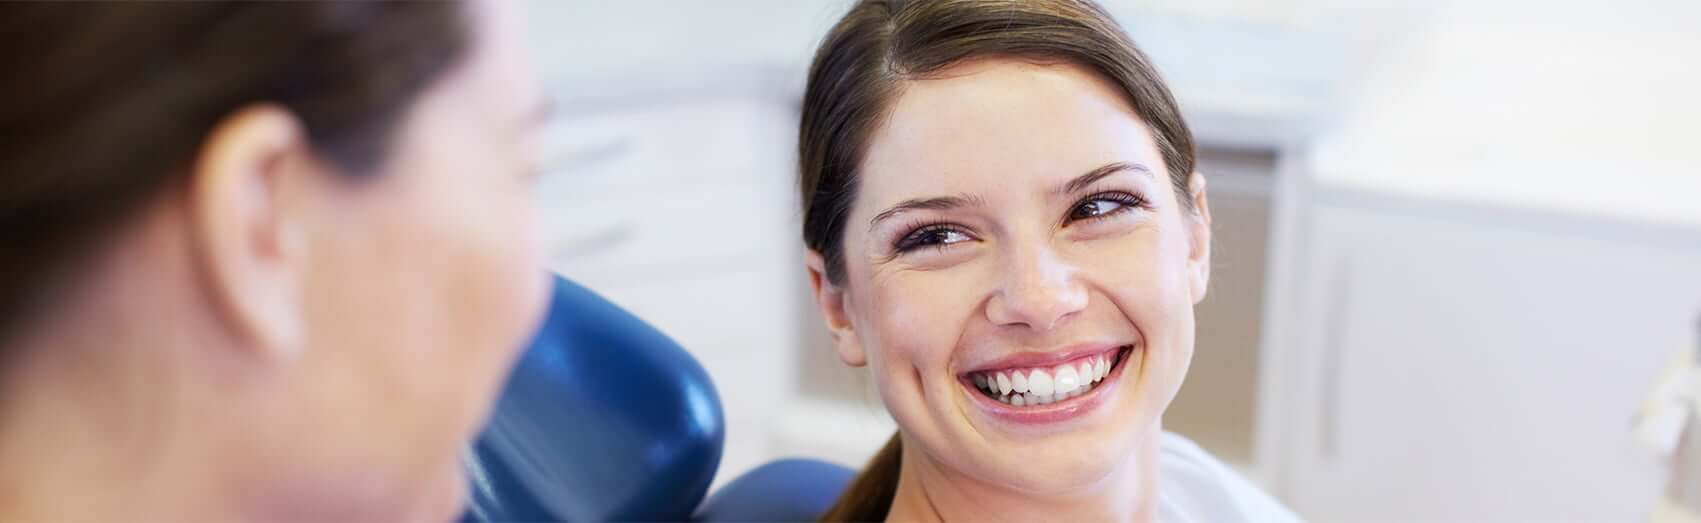 Woman smiling while sitting in dental exam chair